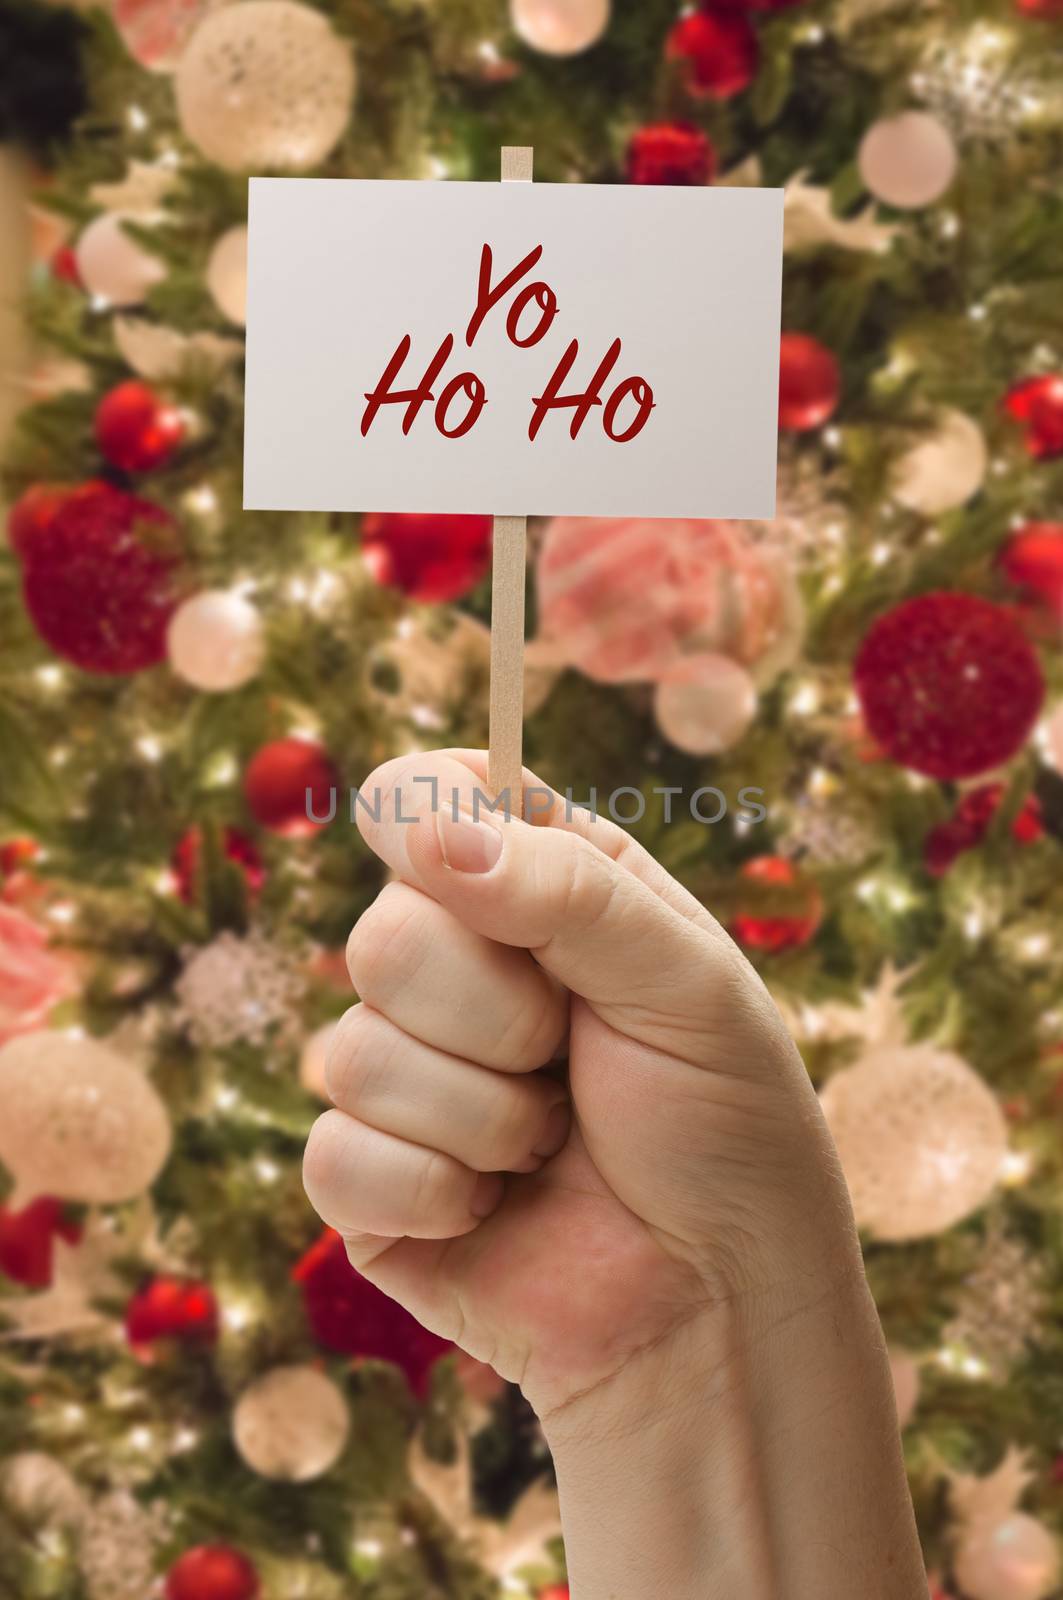 Hand Holding Yo Ho Ho Card In Front of Decorated Christmas Tree. by Feverpitched